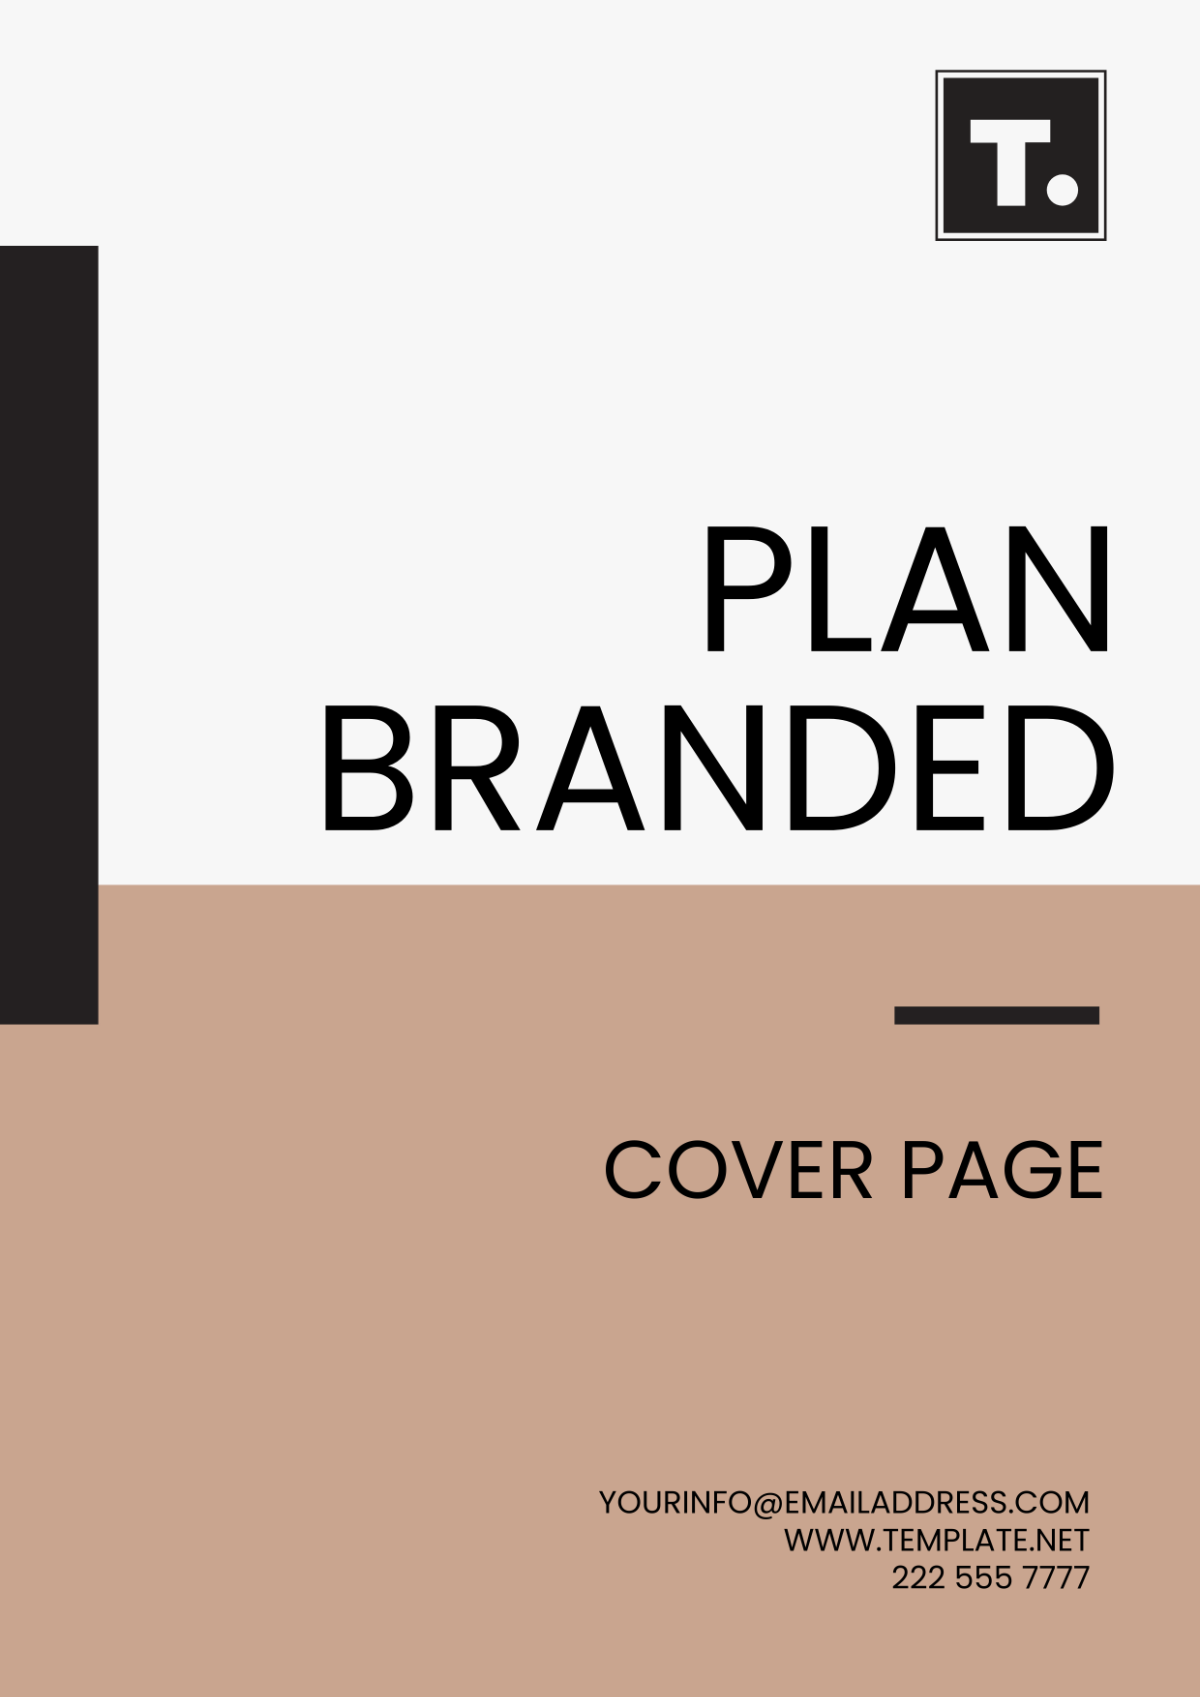 Plan Branded Cover Page Template